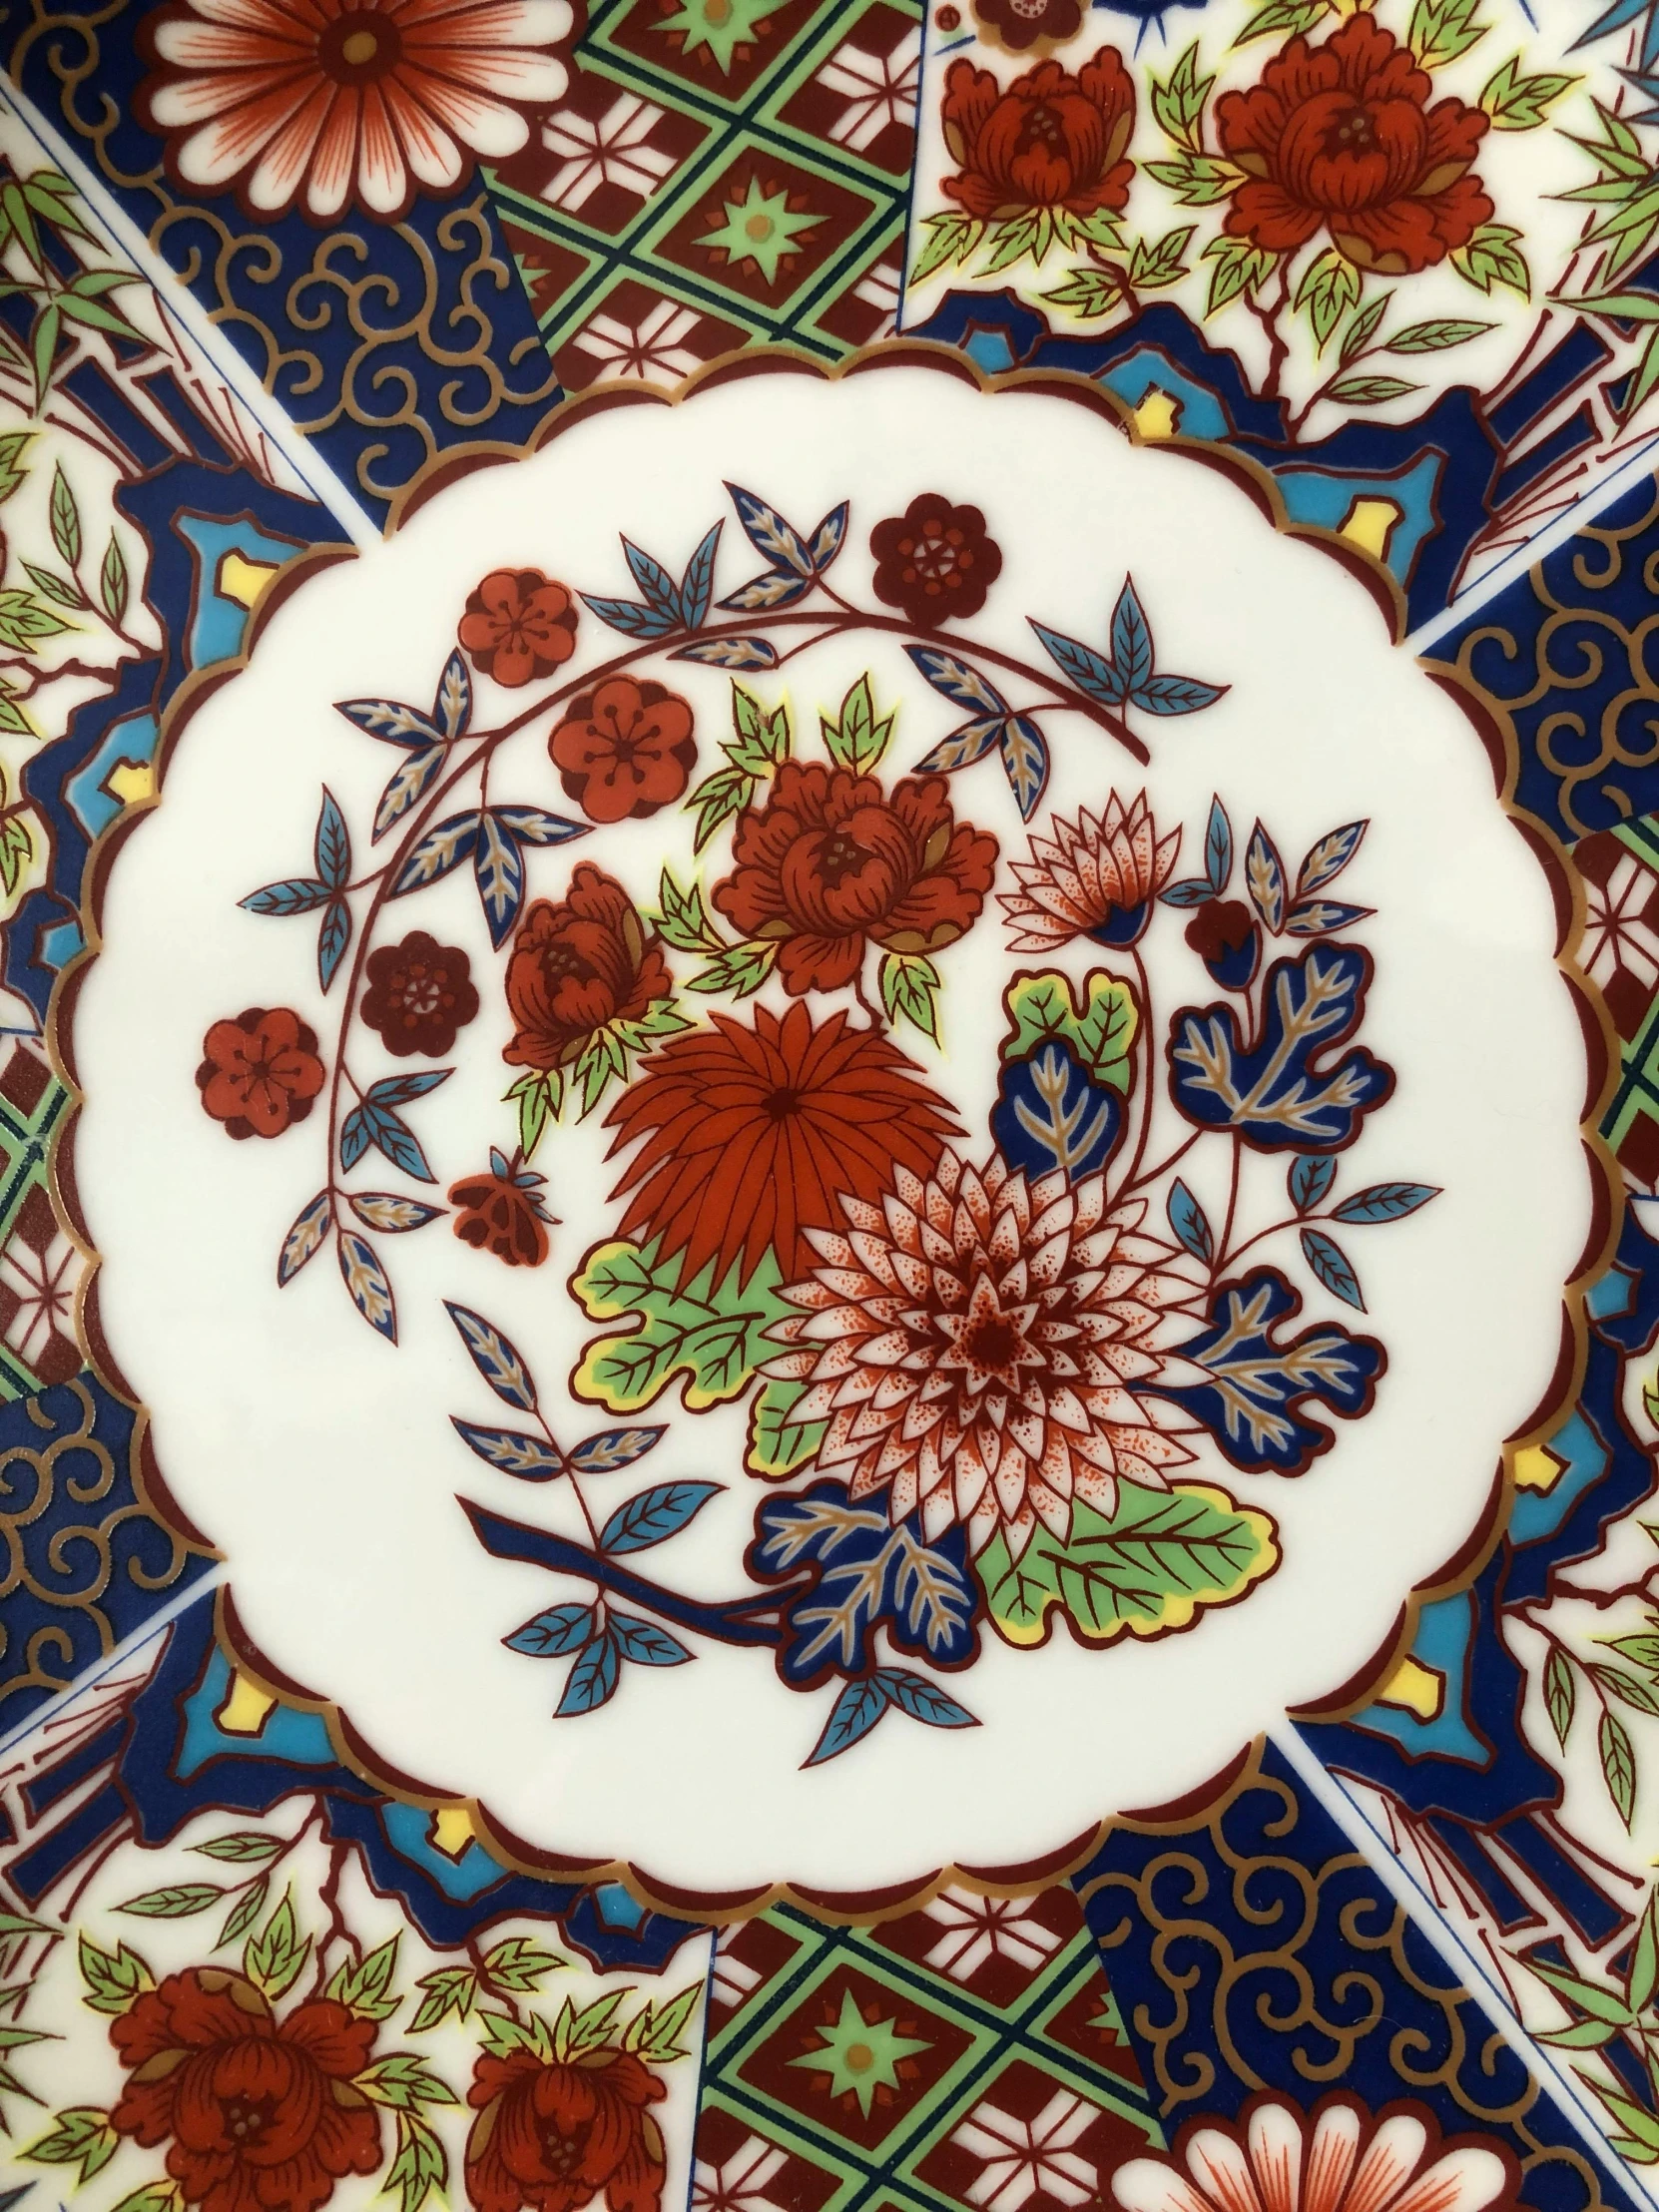 decorative flowered plate on colorful tiles with elaborate patterns